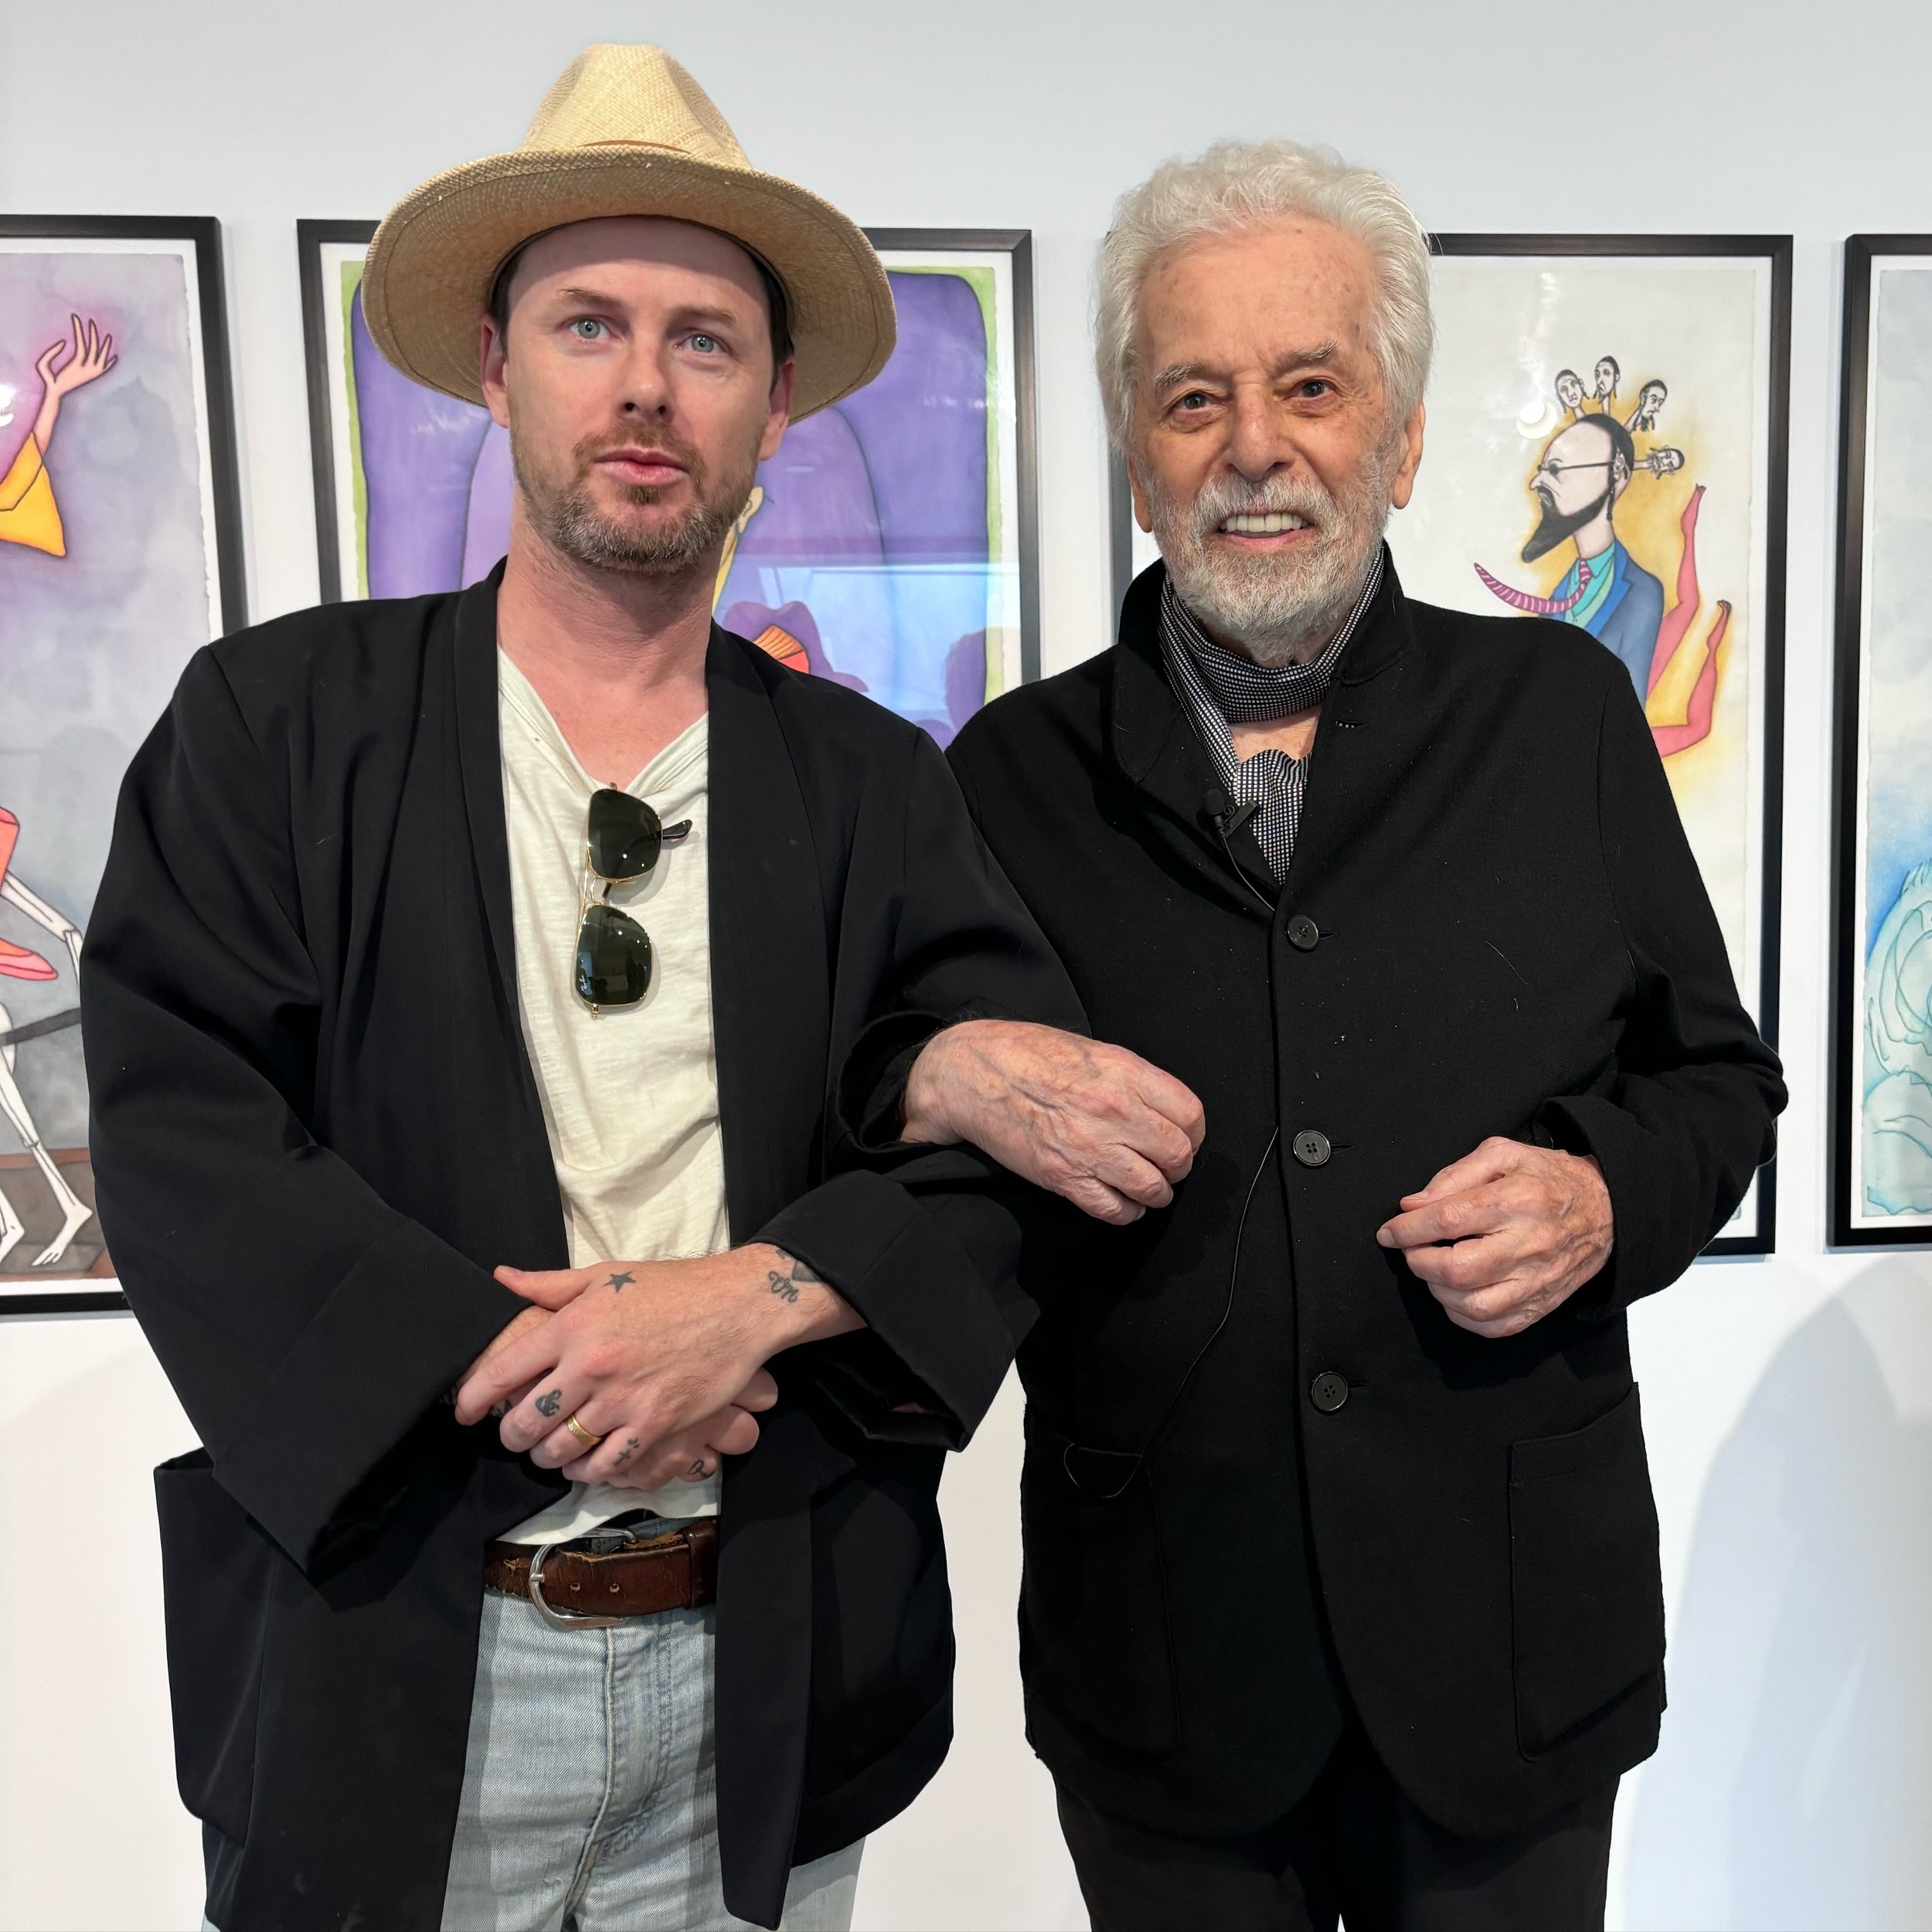 Santa sangre! The legendary @alejandro.jodorowsky has made a rare trip to LA for an @am_cinematheque retrospective of his films playing this weekend at the Egyptian Theatre and a brilliant dual exhibition of works by himself and his wife @pascale_mon